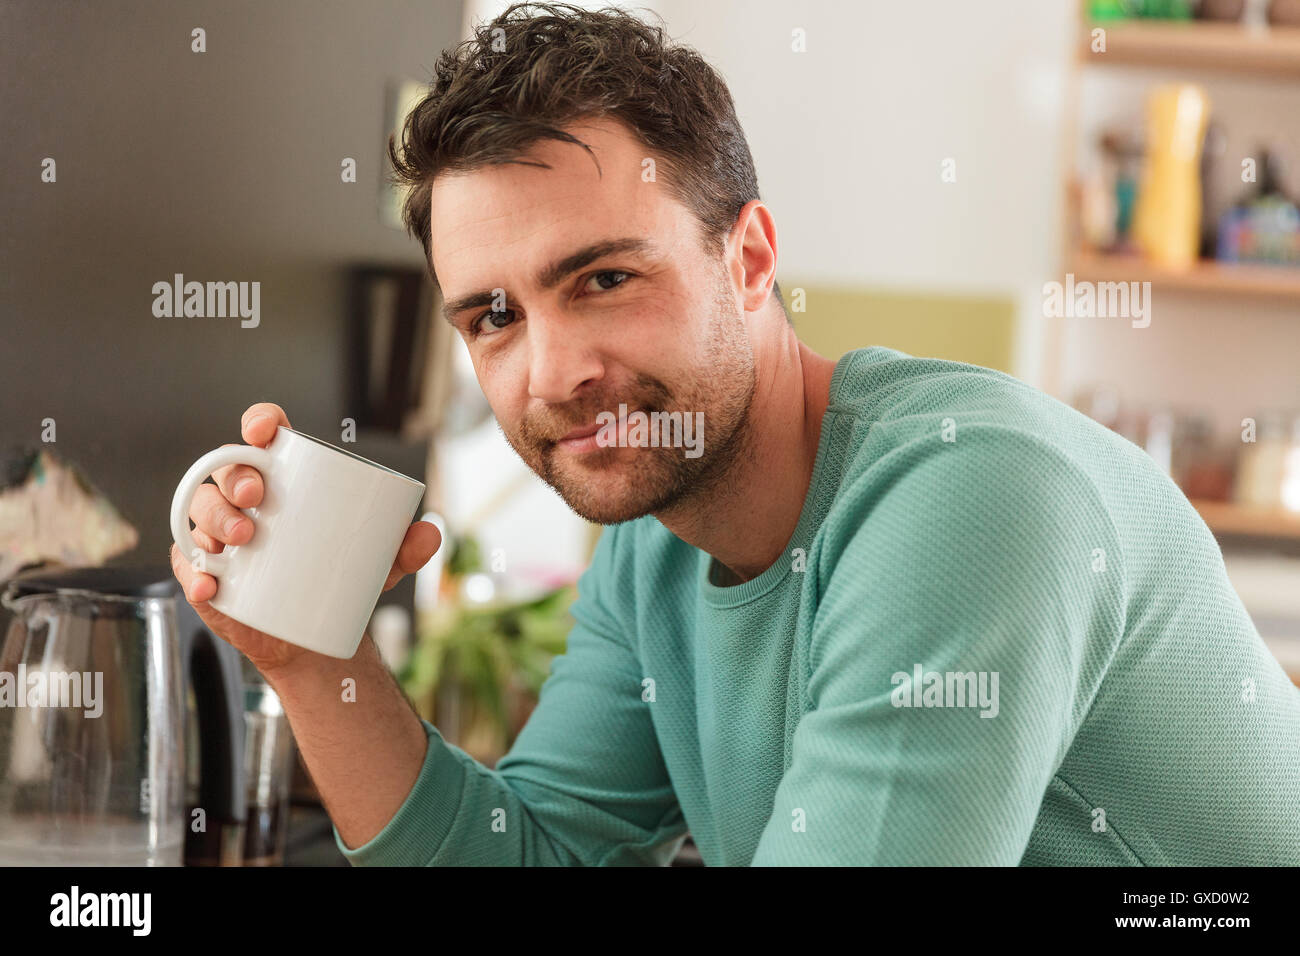 Portrait of man holding coffee cup looking at camera smiling Stock Photo